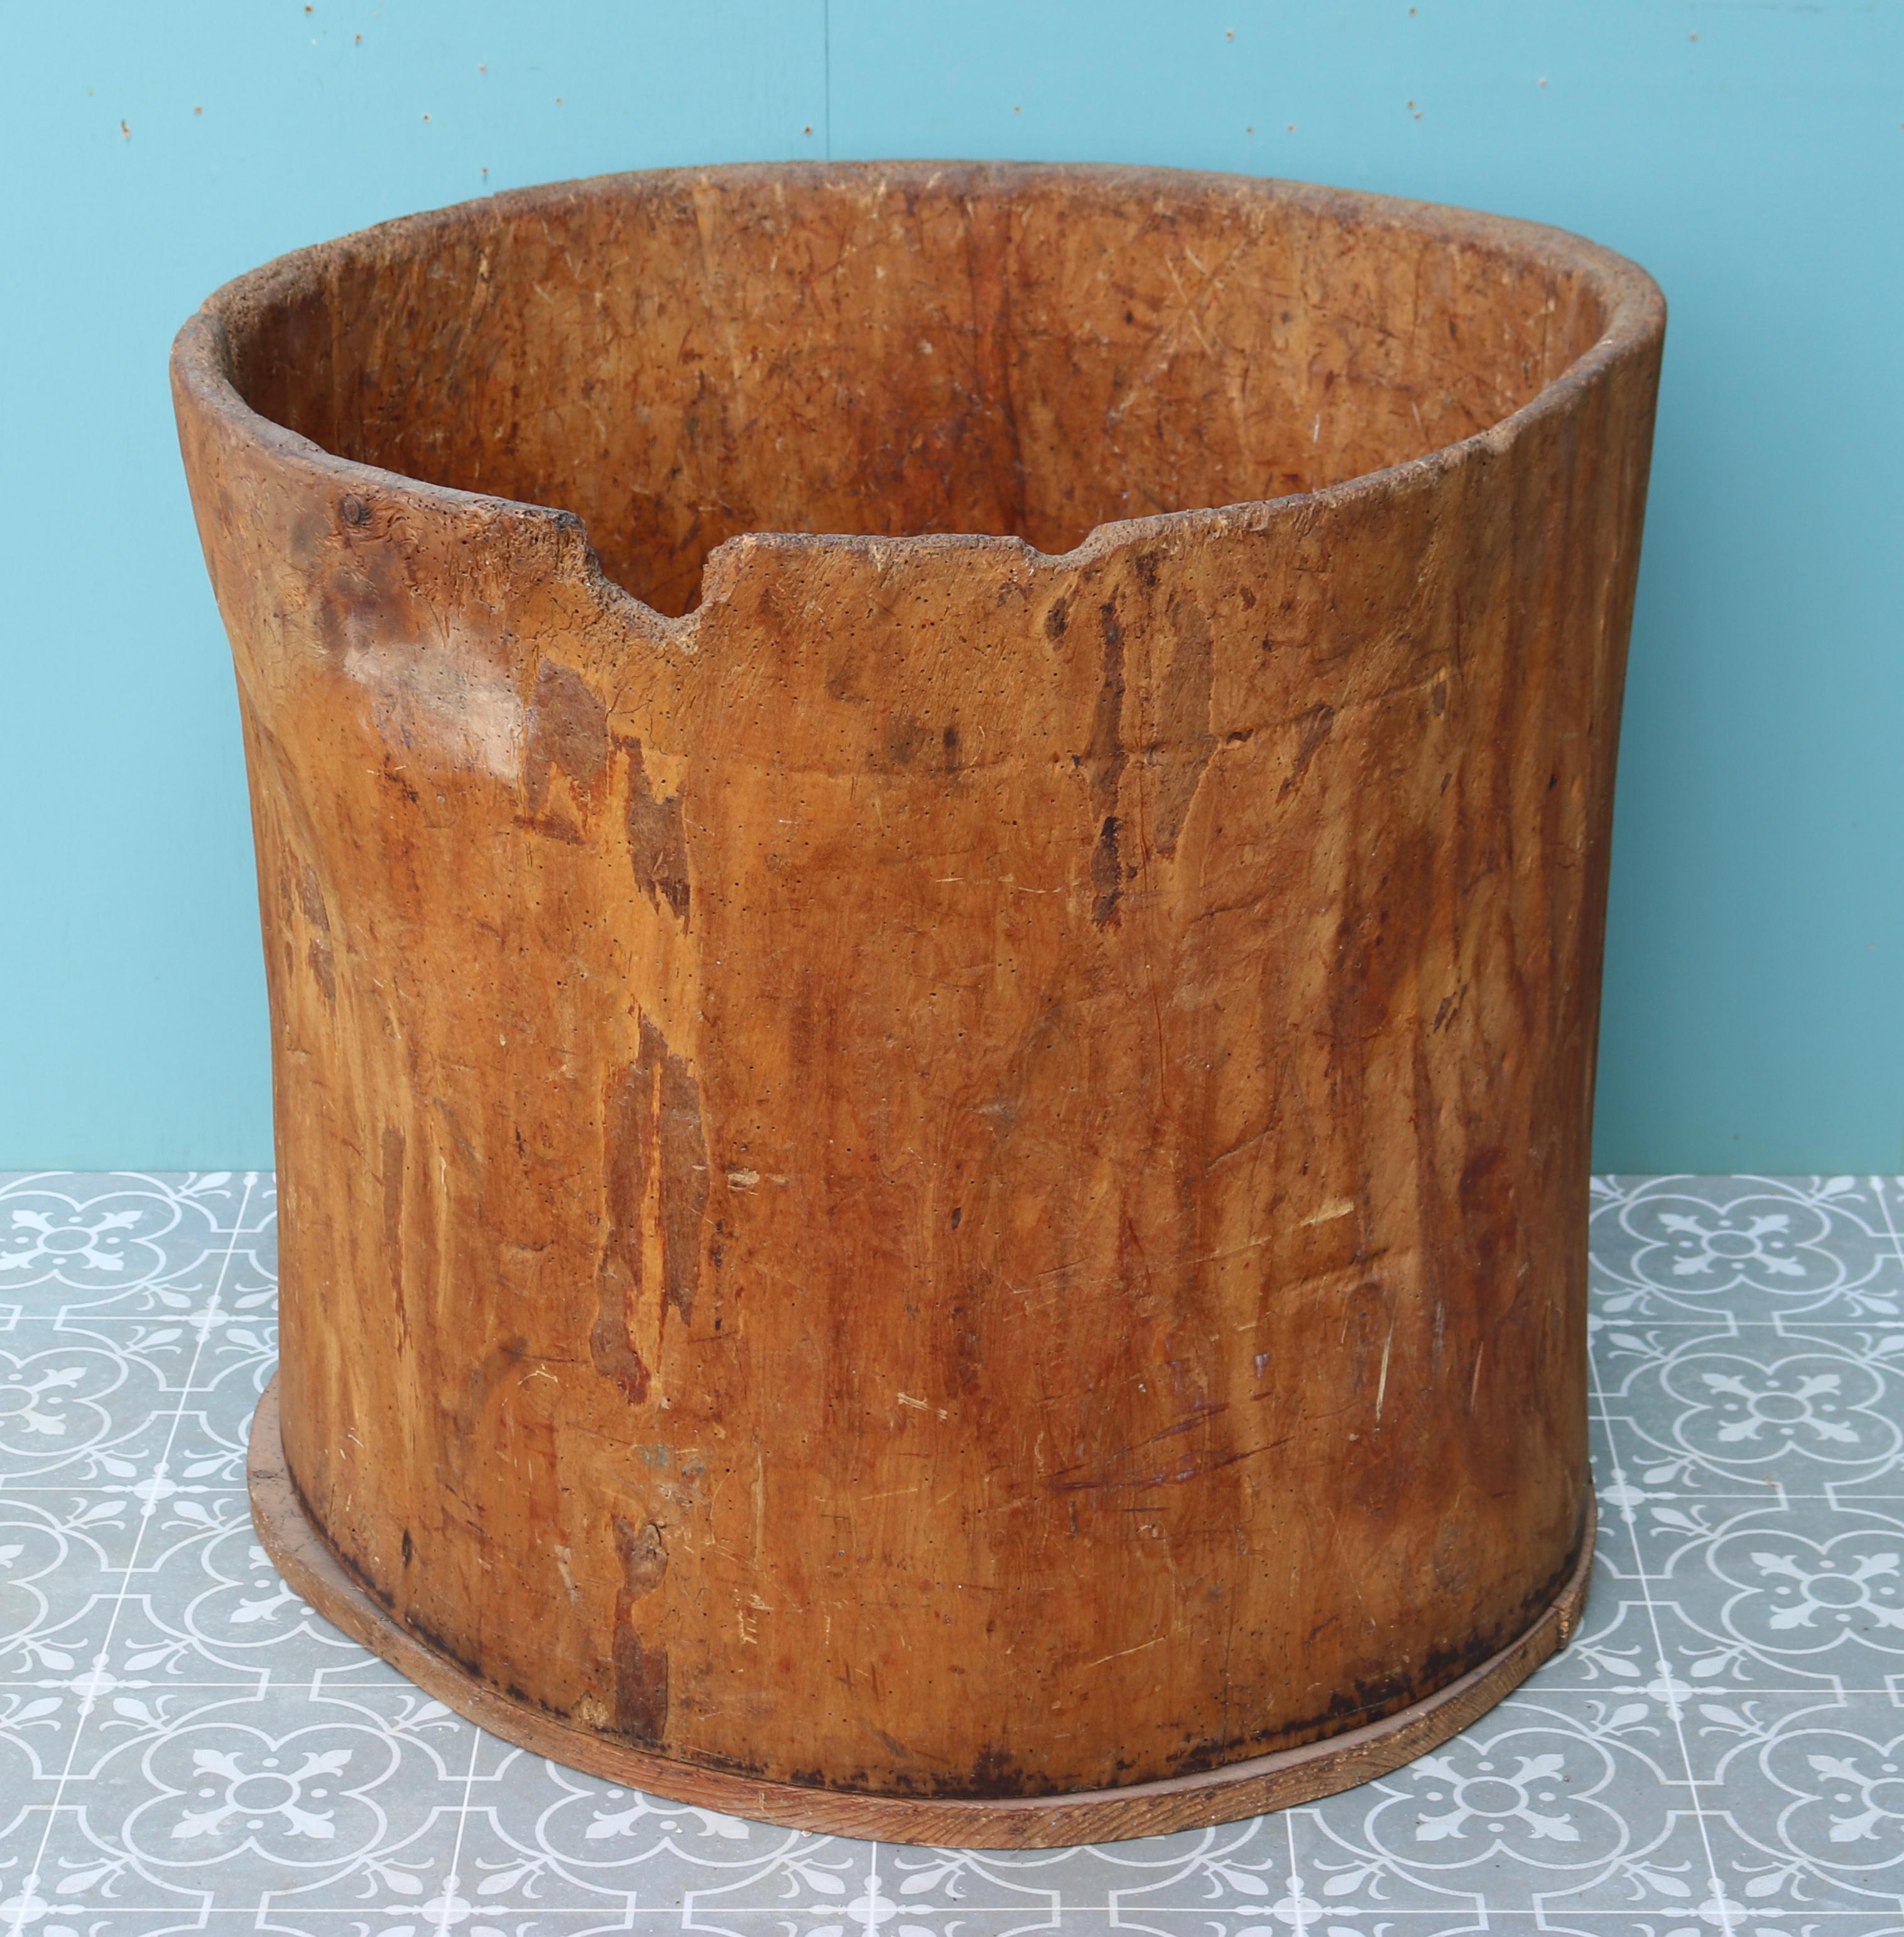 A reclaimed log basket formed from a hollowed tree trunk.